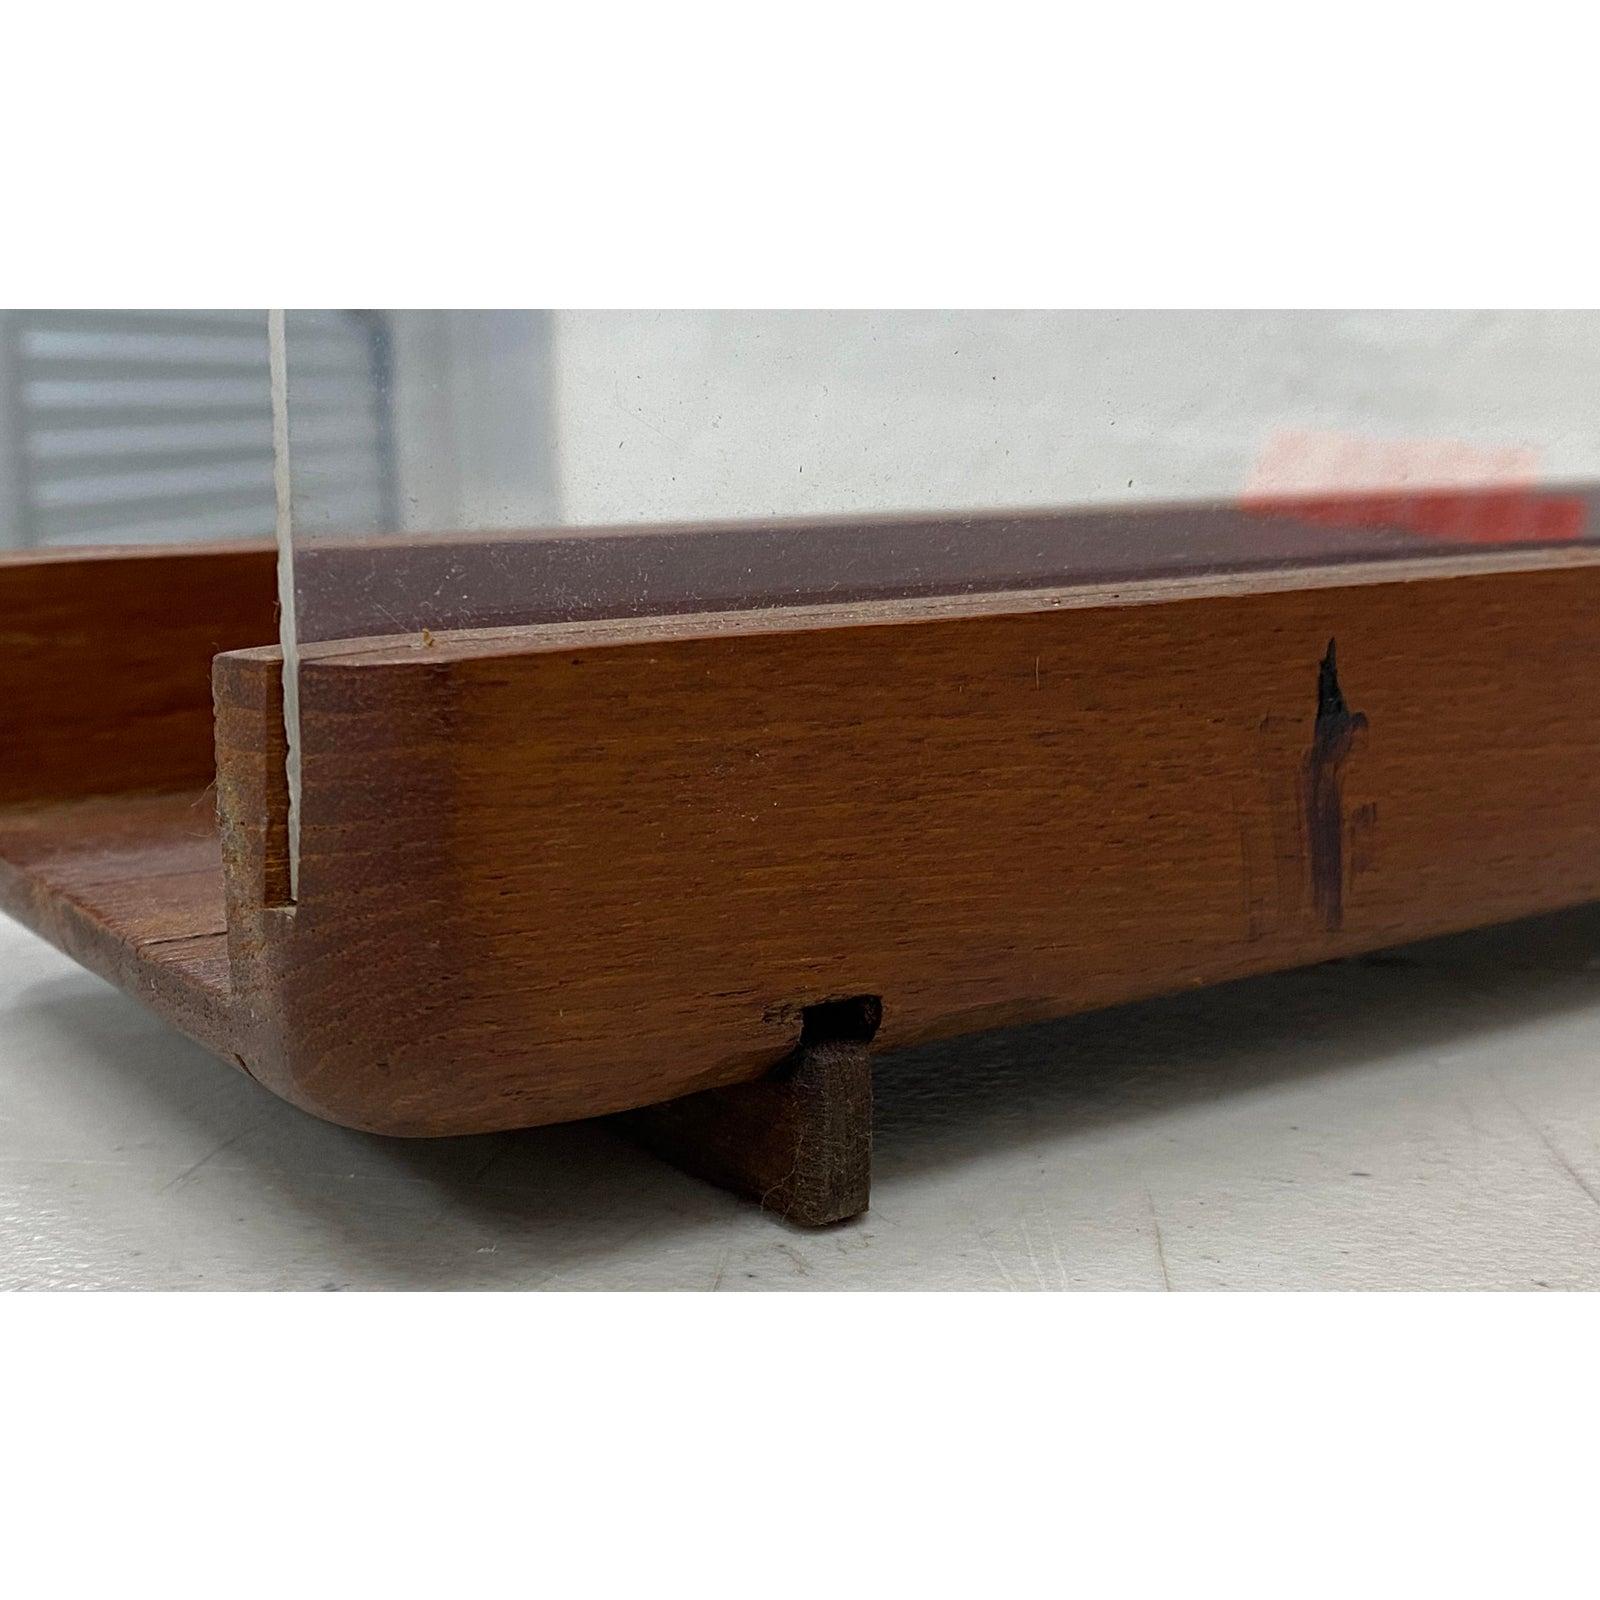 Ernest Sohn Siamese Teak and Acrylic Magazine Holder, circa 1960 In Good Condition For Sale In San Francisco, CA